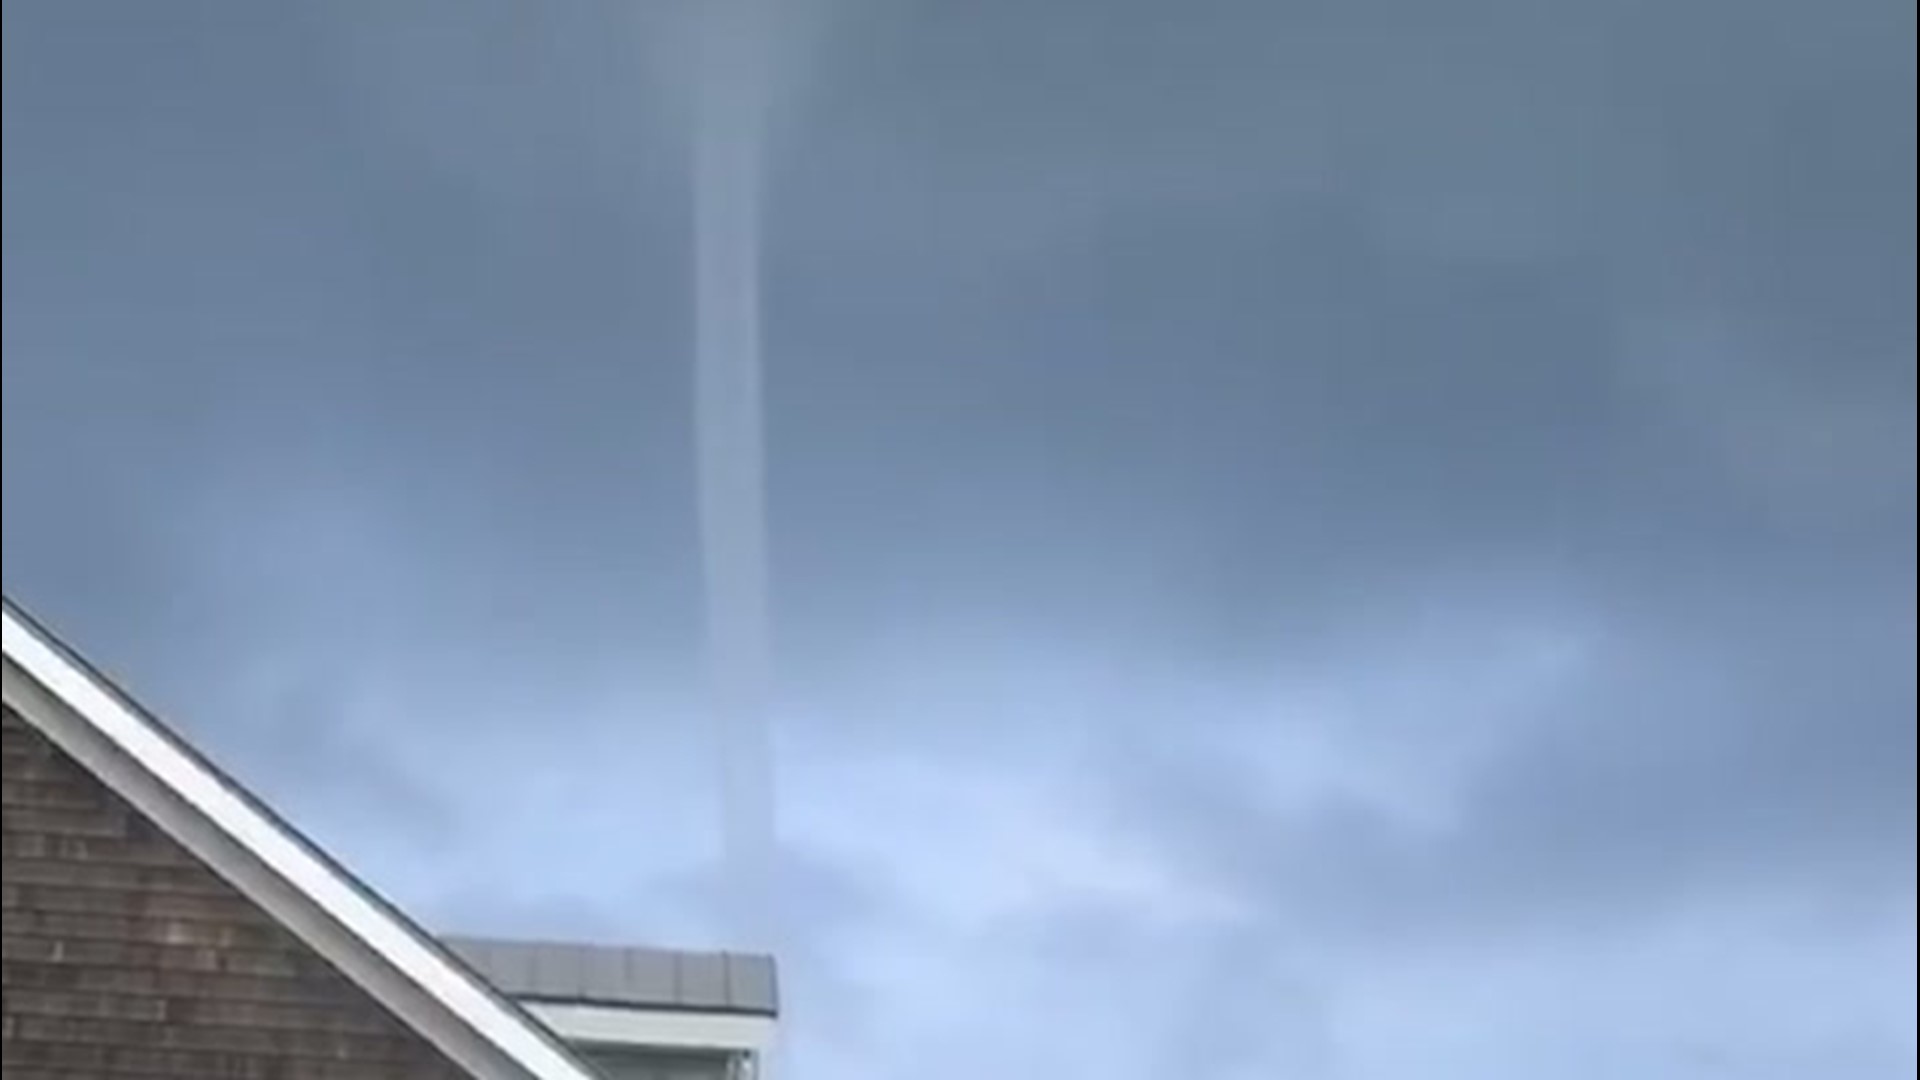 Holland Mills recorded as a waterspout spun up along the coast in Emerald Isle, North Carolina, on July 6.